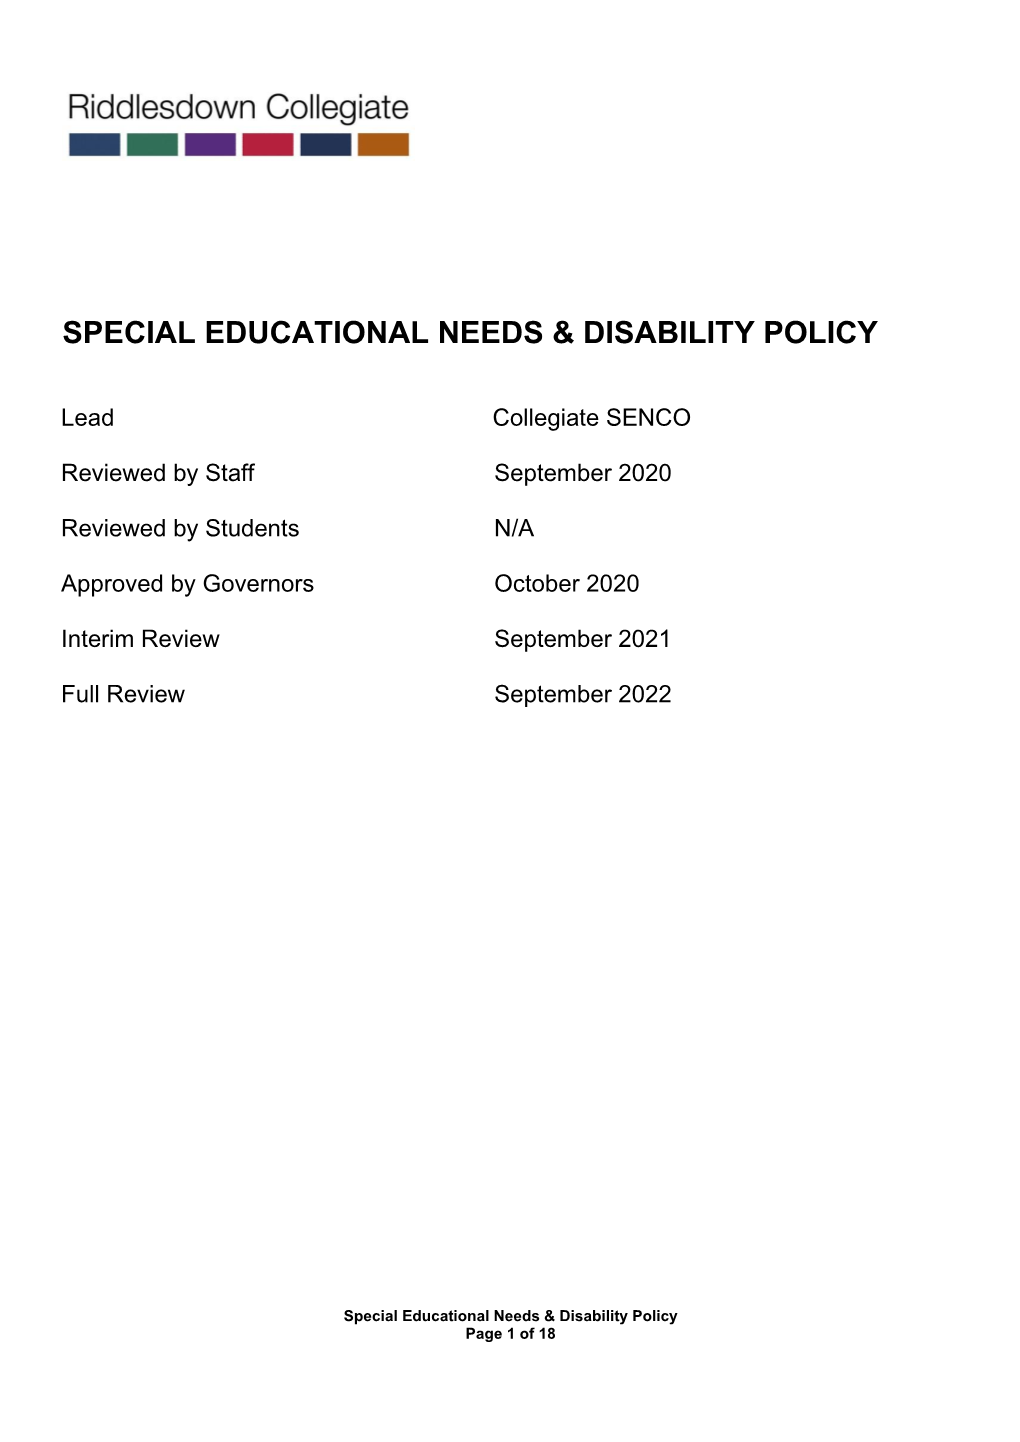 Special Educational Needs & Disability Policy